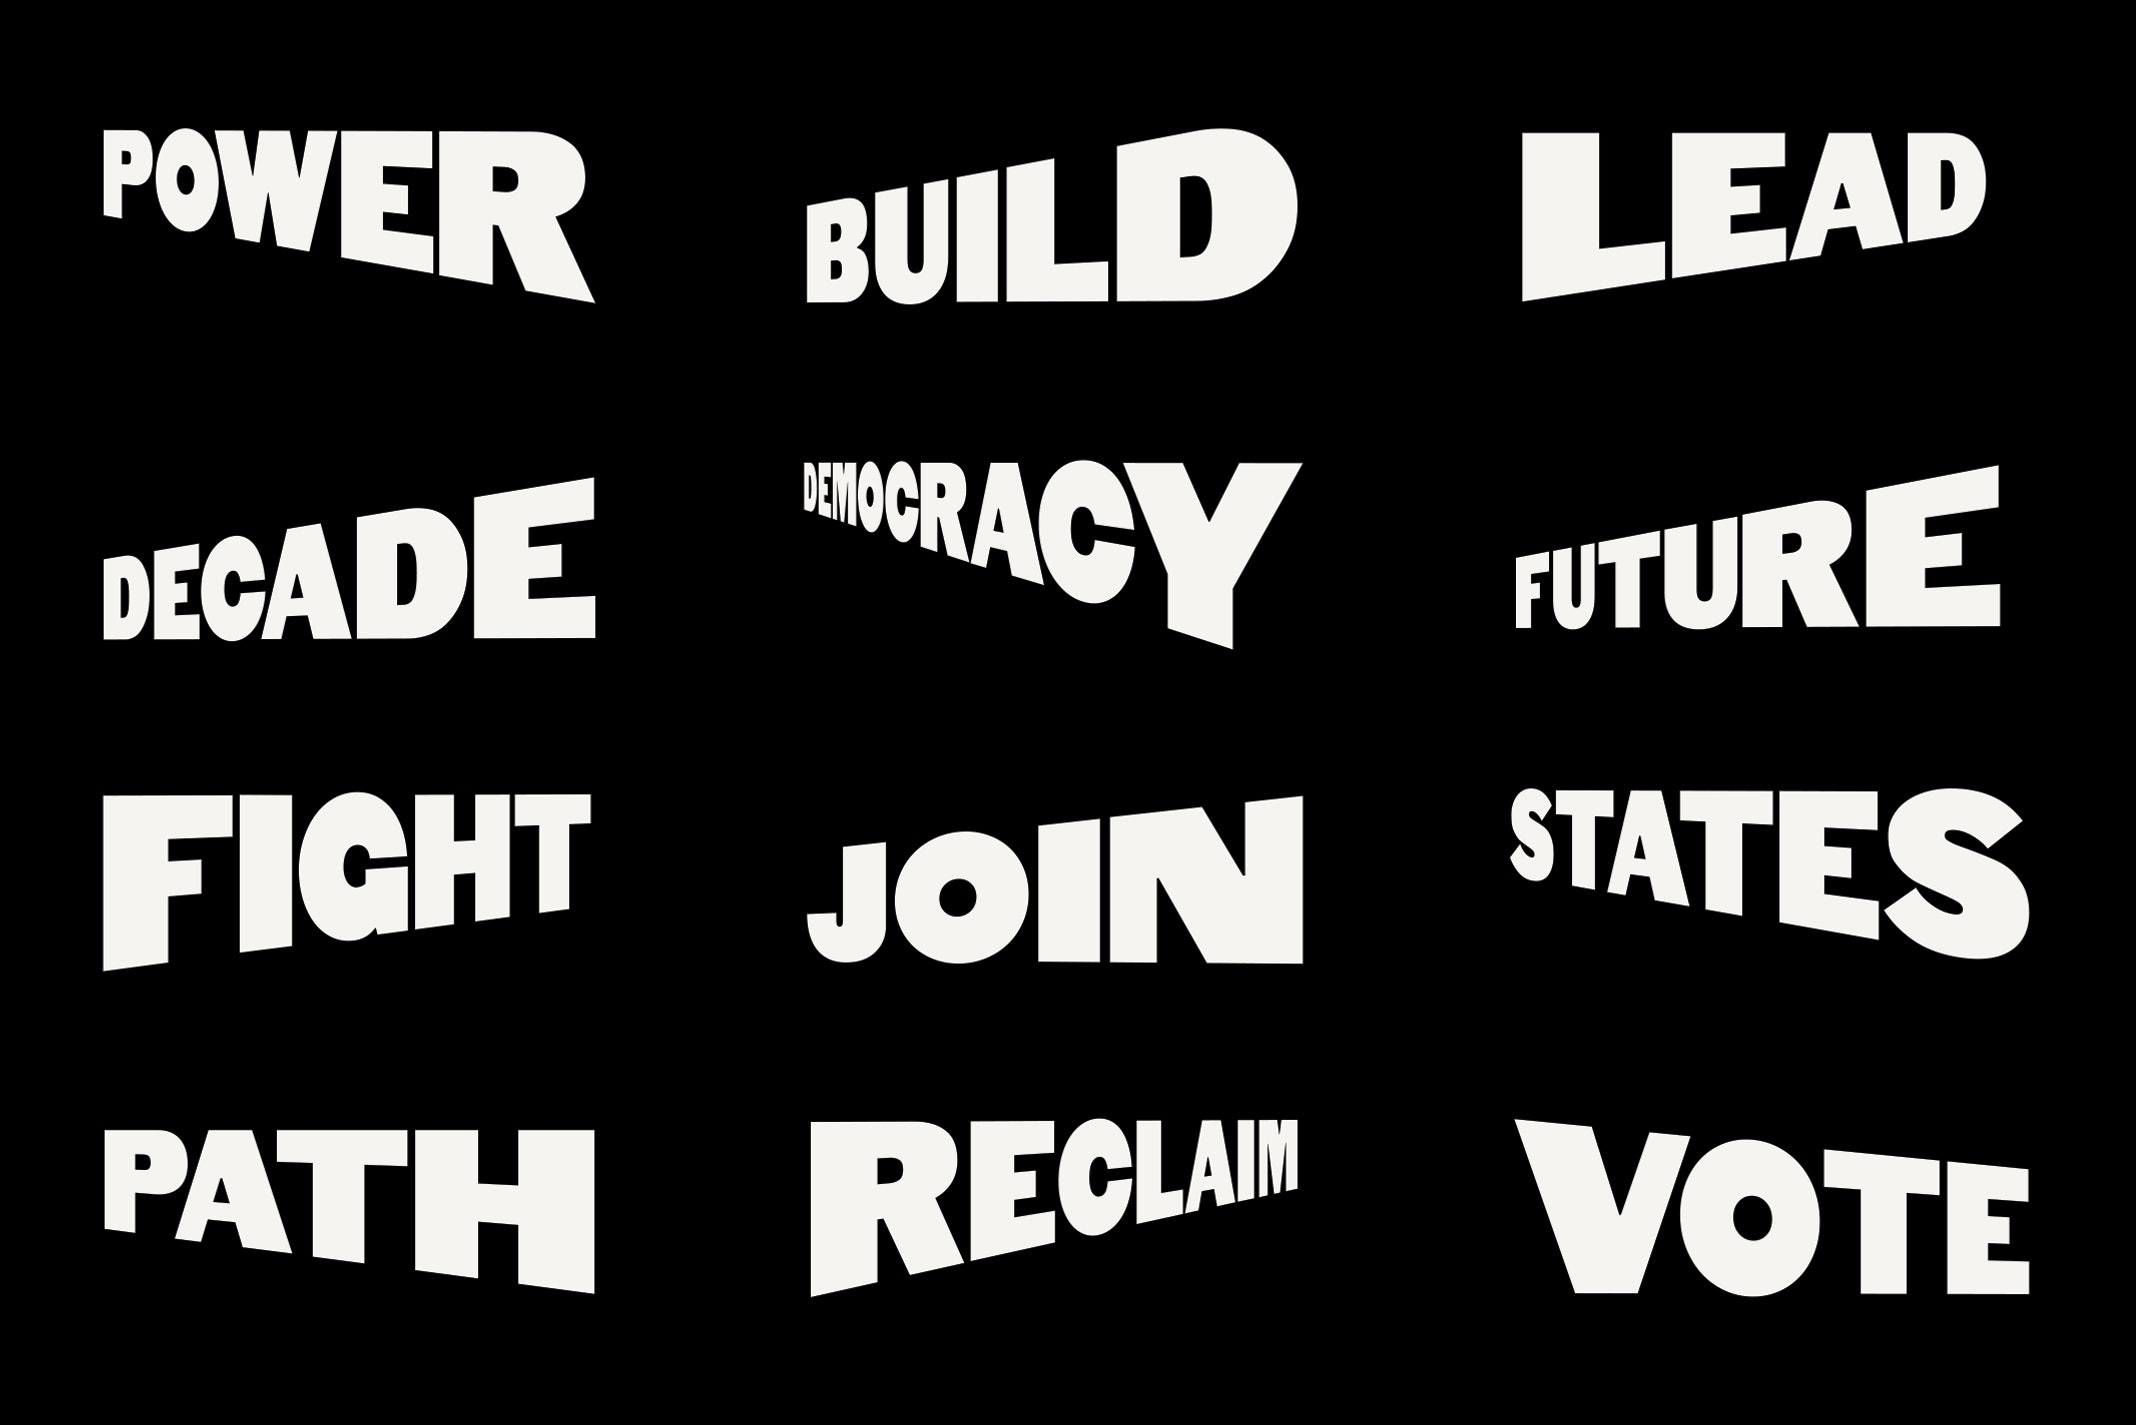 Visual identity for political action committee Forward Majority designed by New York-based studio Order